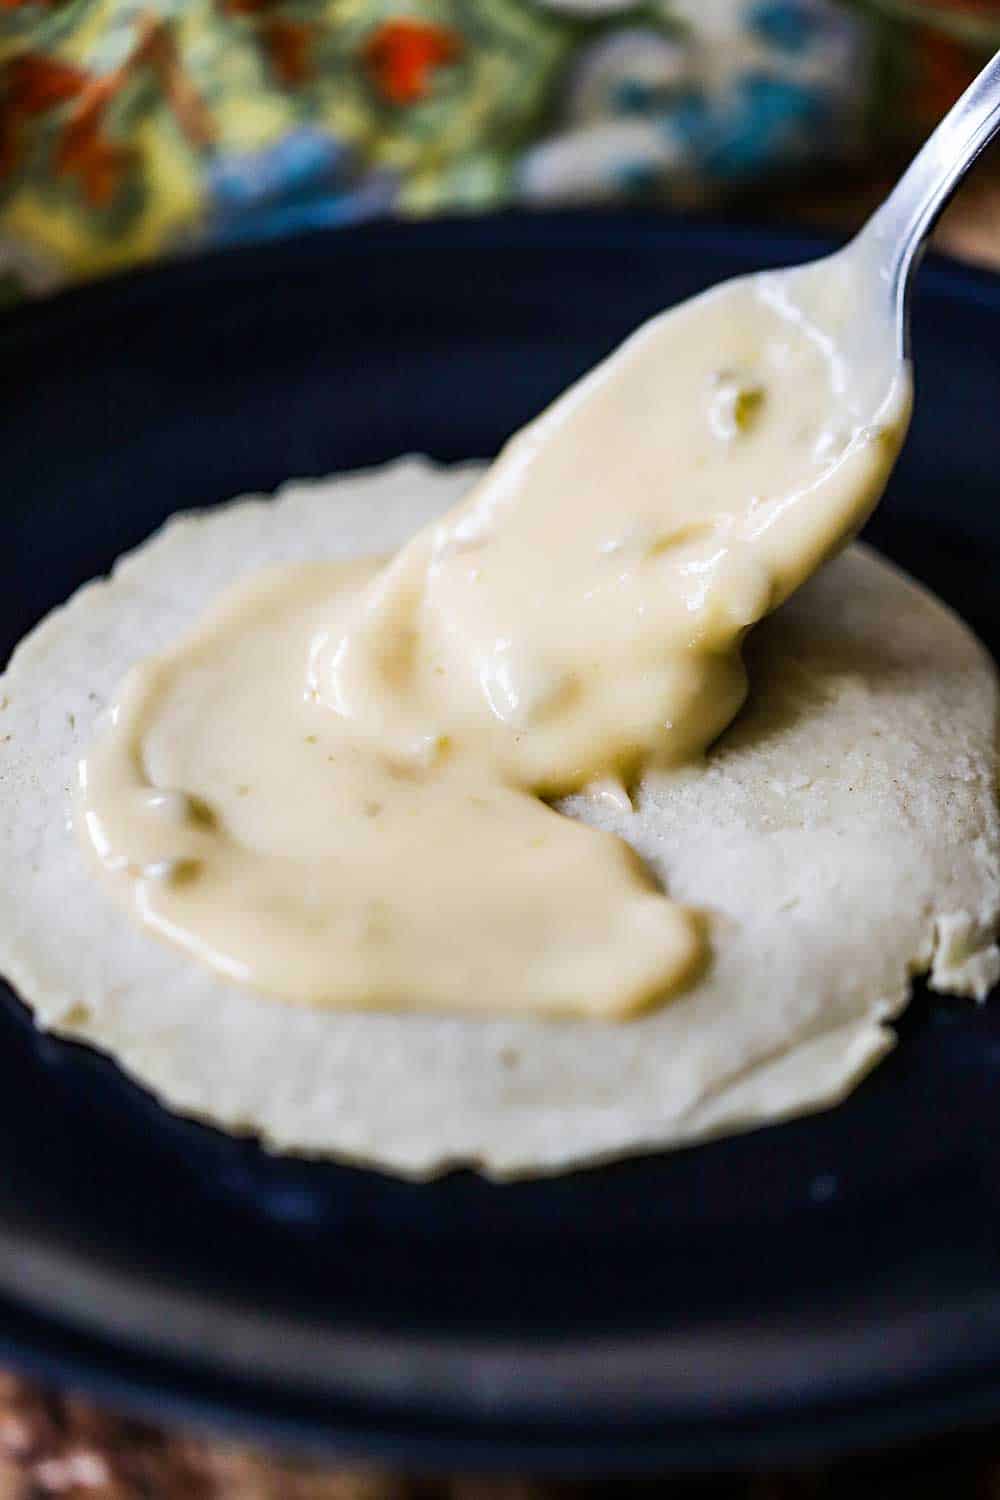 A large spoon spreading a cheese sauce over the surface of a homemade corn tortilla.